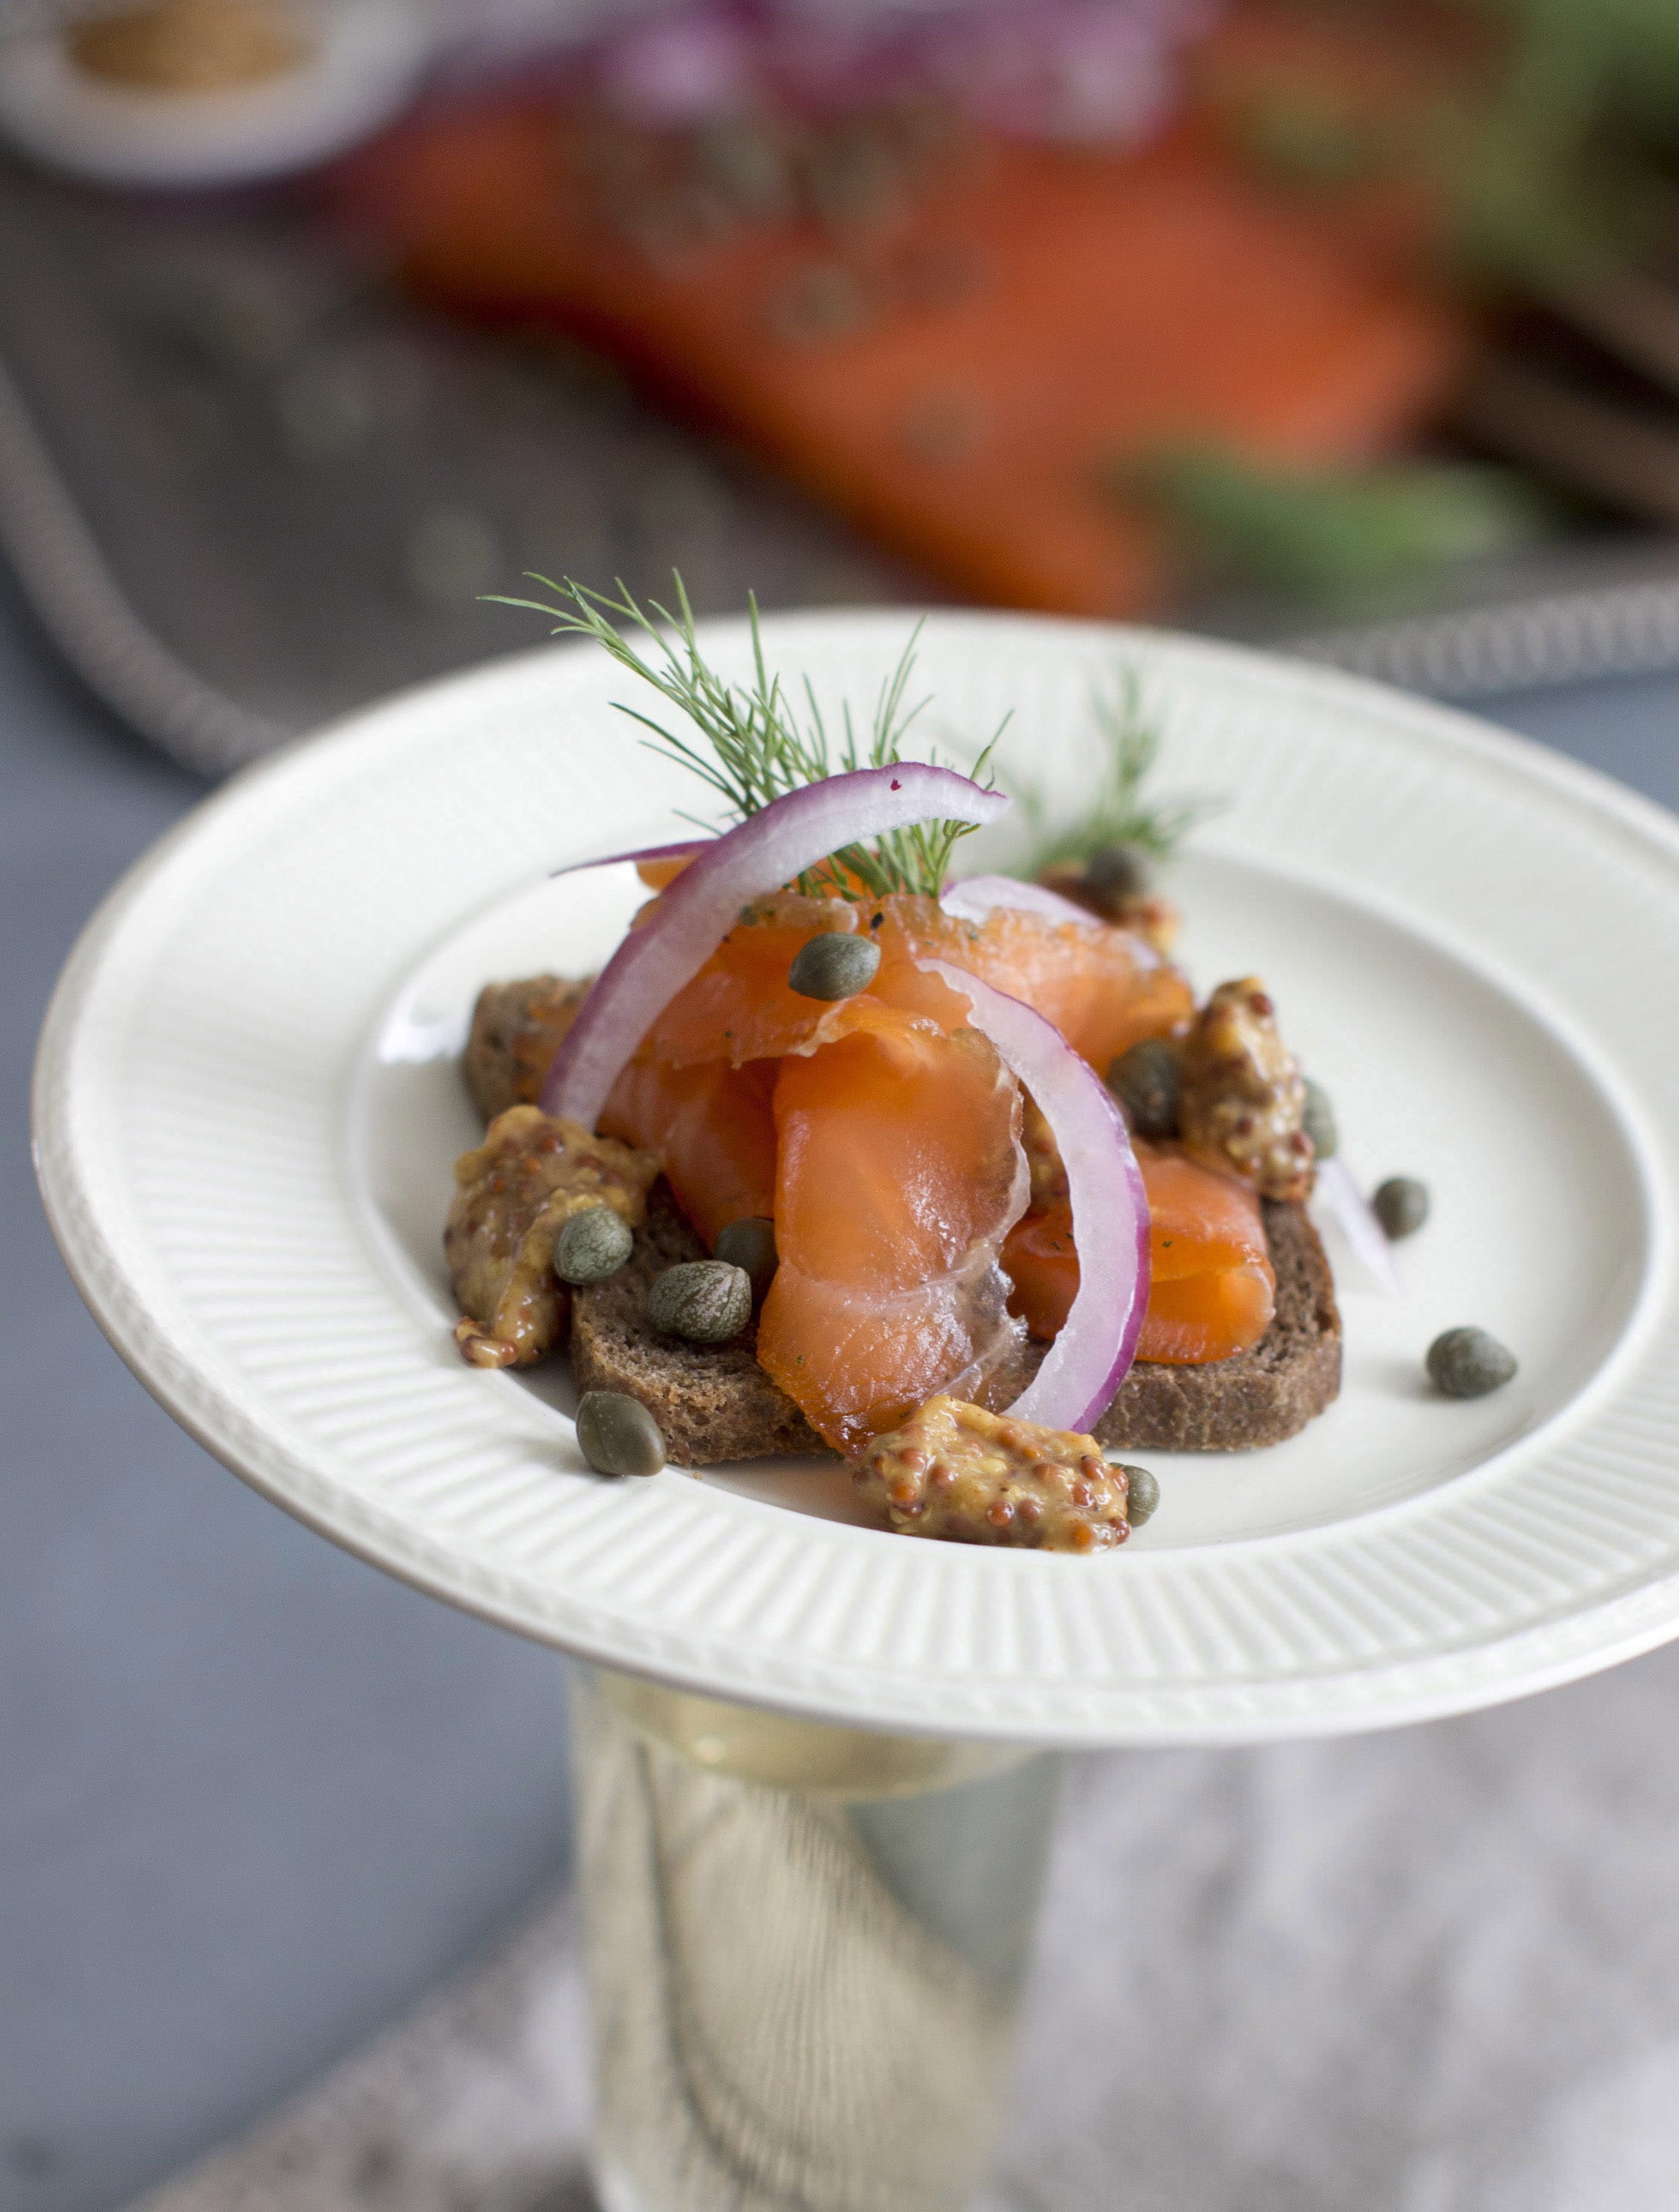 Gravlax, cured salmon known by its Nordic name, generally is made by dry-curing fillets of salmon in a blend of sugar, kosher salt, fresh dill and a variety of other seasonings.